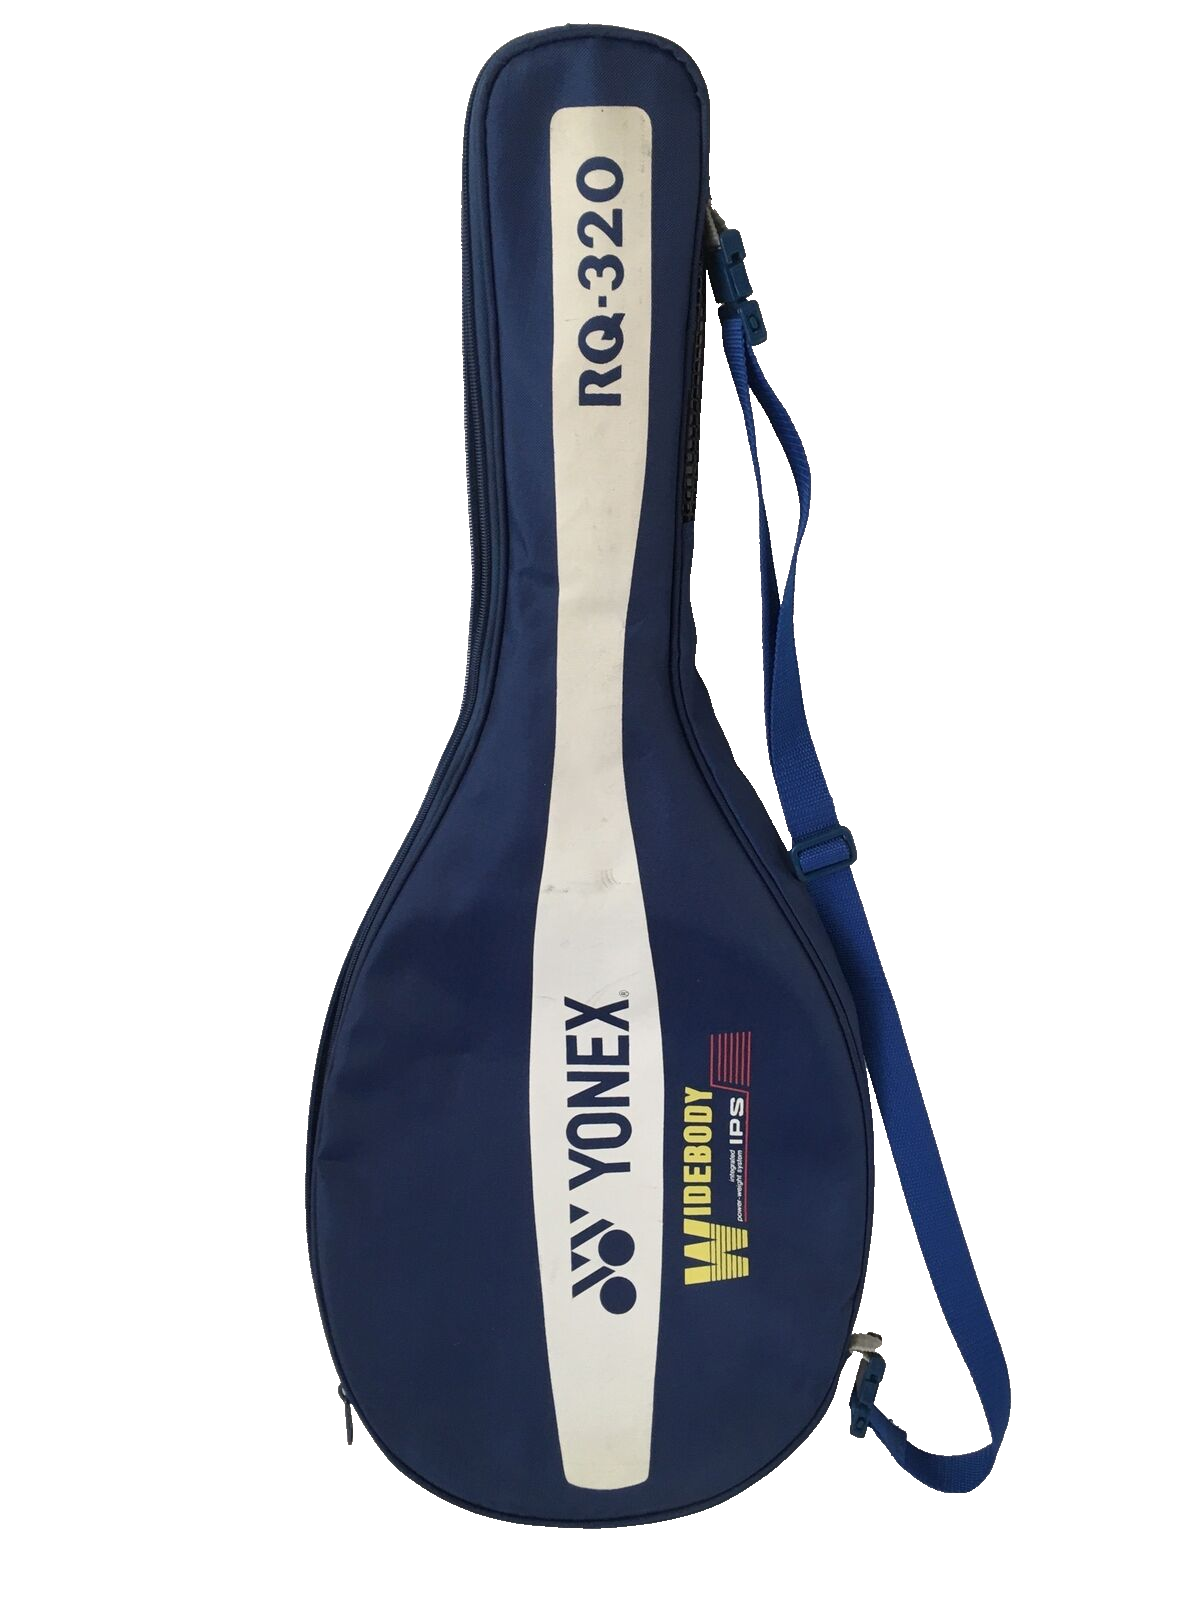 Primary image for Yonex Rq 320 Wide Body Rq-320 Widebody Tennis Racket Case Bag ONLY